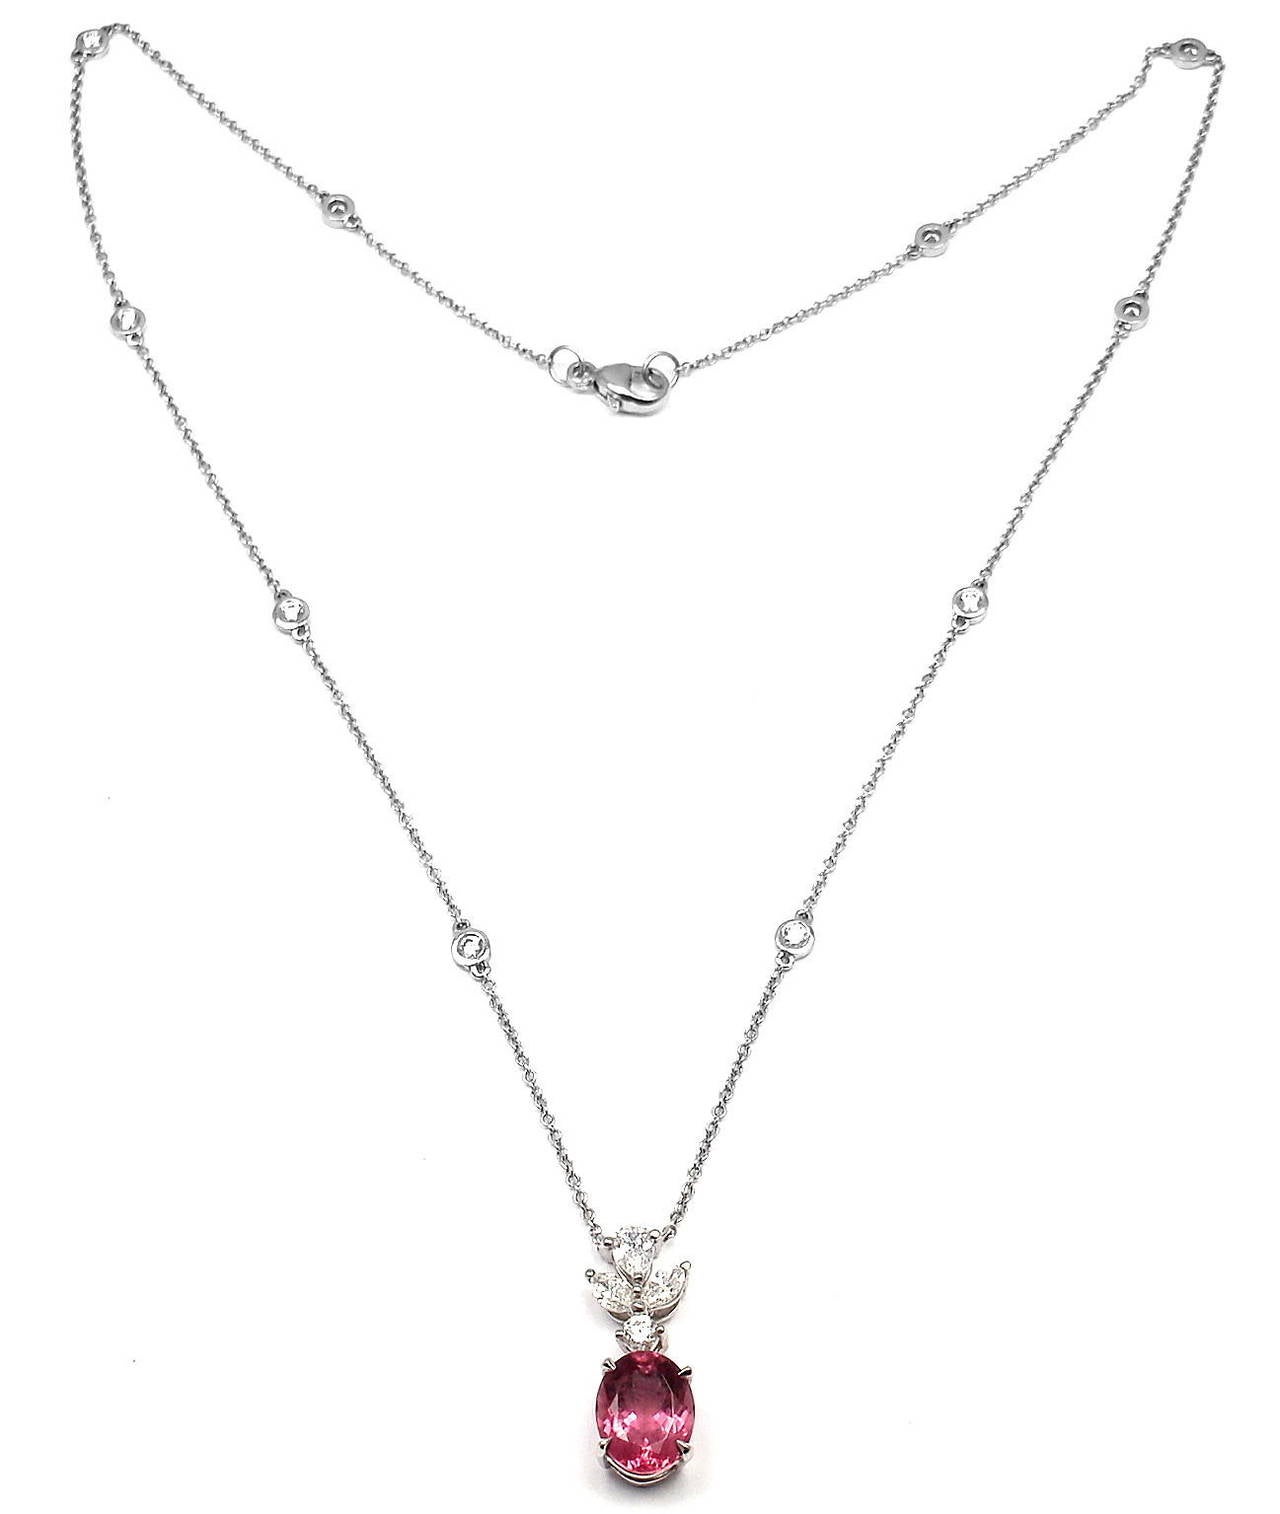 Platinum Diamond and Pink Tourmaline Necklace by Tiffany & Co. 
With 2 marquise shaped brilliant cut diamonds,   11 round shape brilliant cut diamonds and 1 pearl shape.

t/w = .61ct  VS1 clarity F color
1 oval pink tourmaline approx.